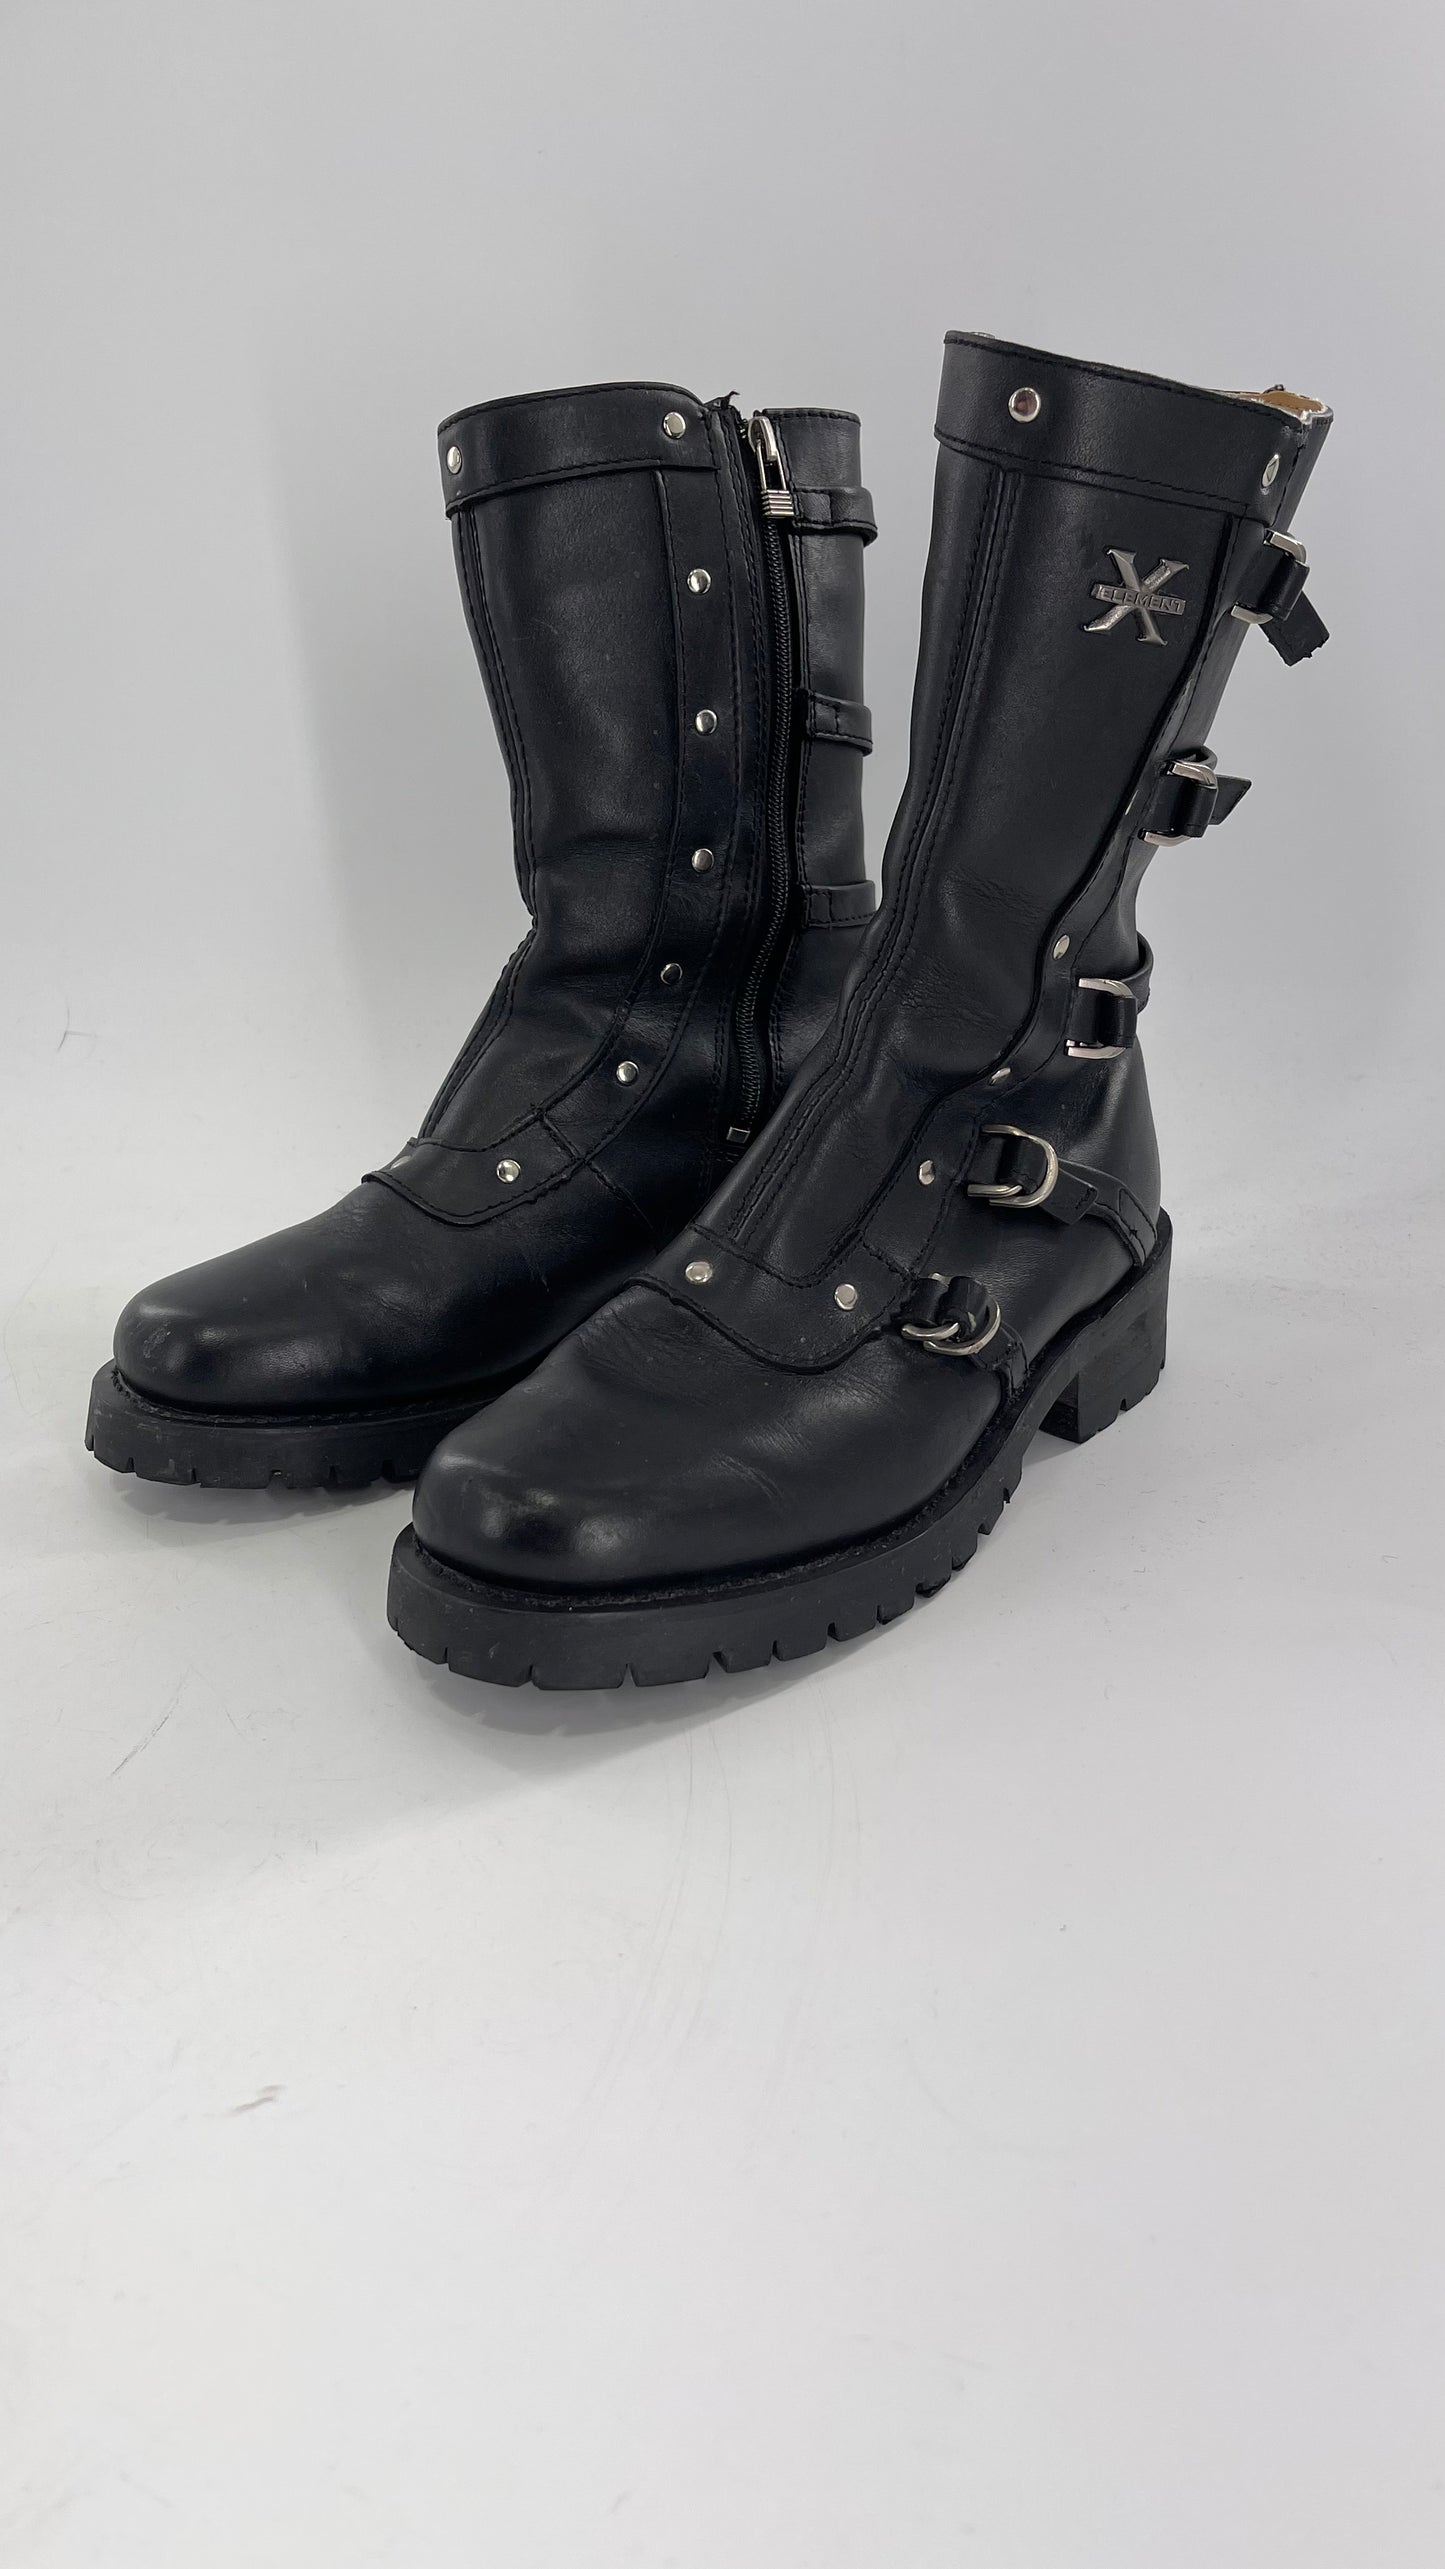 Vintage 1990s XELEMENT Buckle Side Genuine Leather Steam Punk Boots (Women’s 8.5)